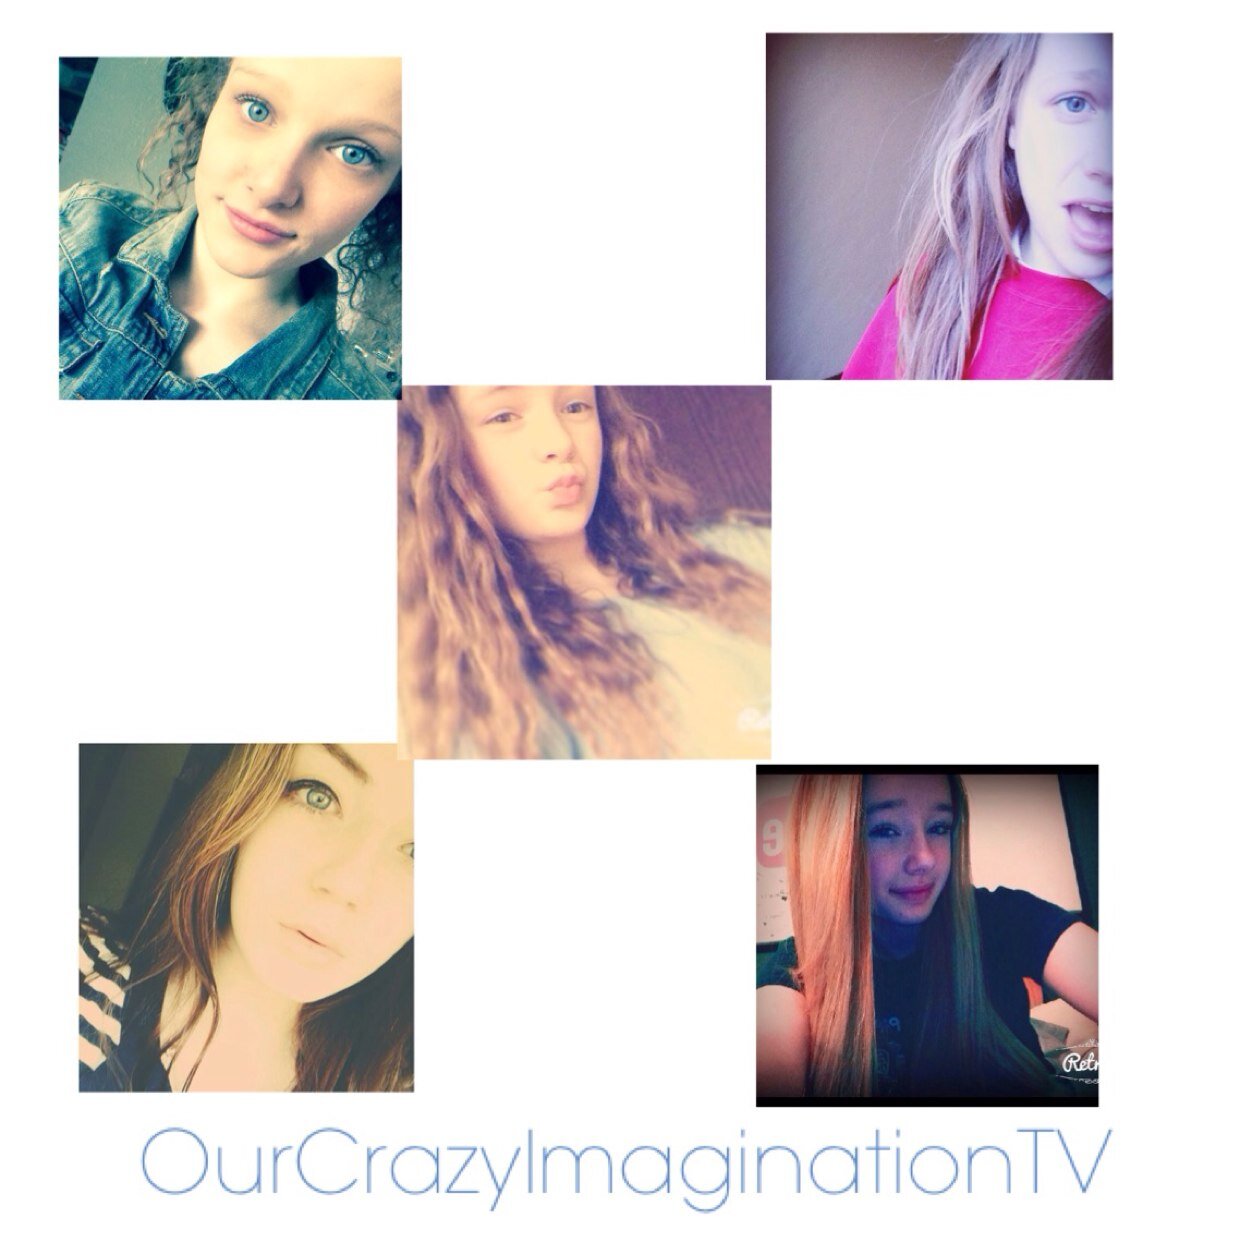 HEY GUYS!! Its Bethany, Chloe, Eloise, Lucy and Robyn here. New Youtubers. Youtube link in our bio (soon). Love all your support! Thank you.